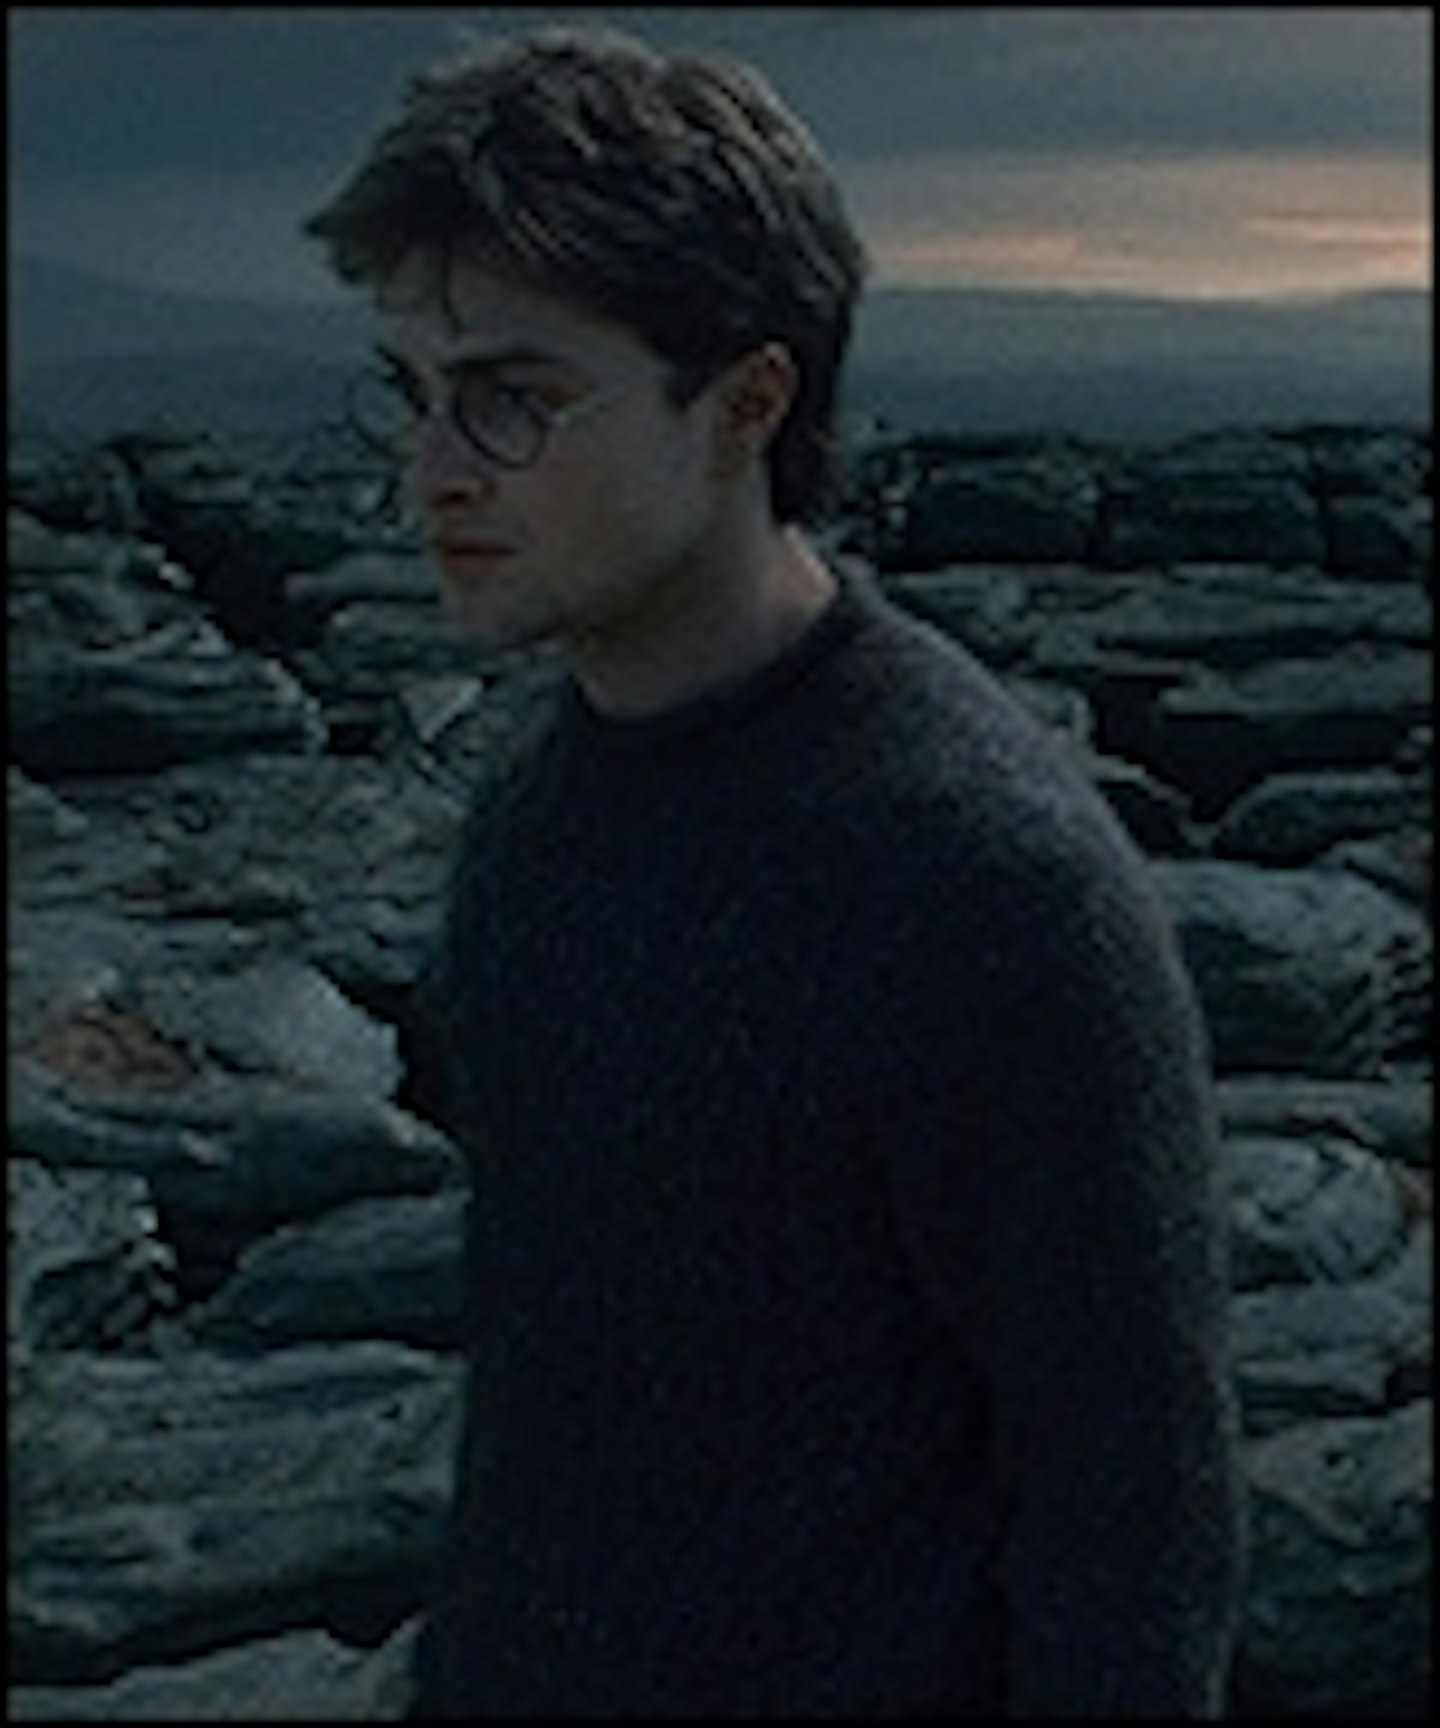 The New Deathly Hallows Trailer Is Here!